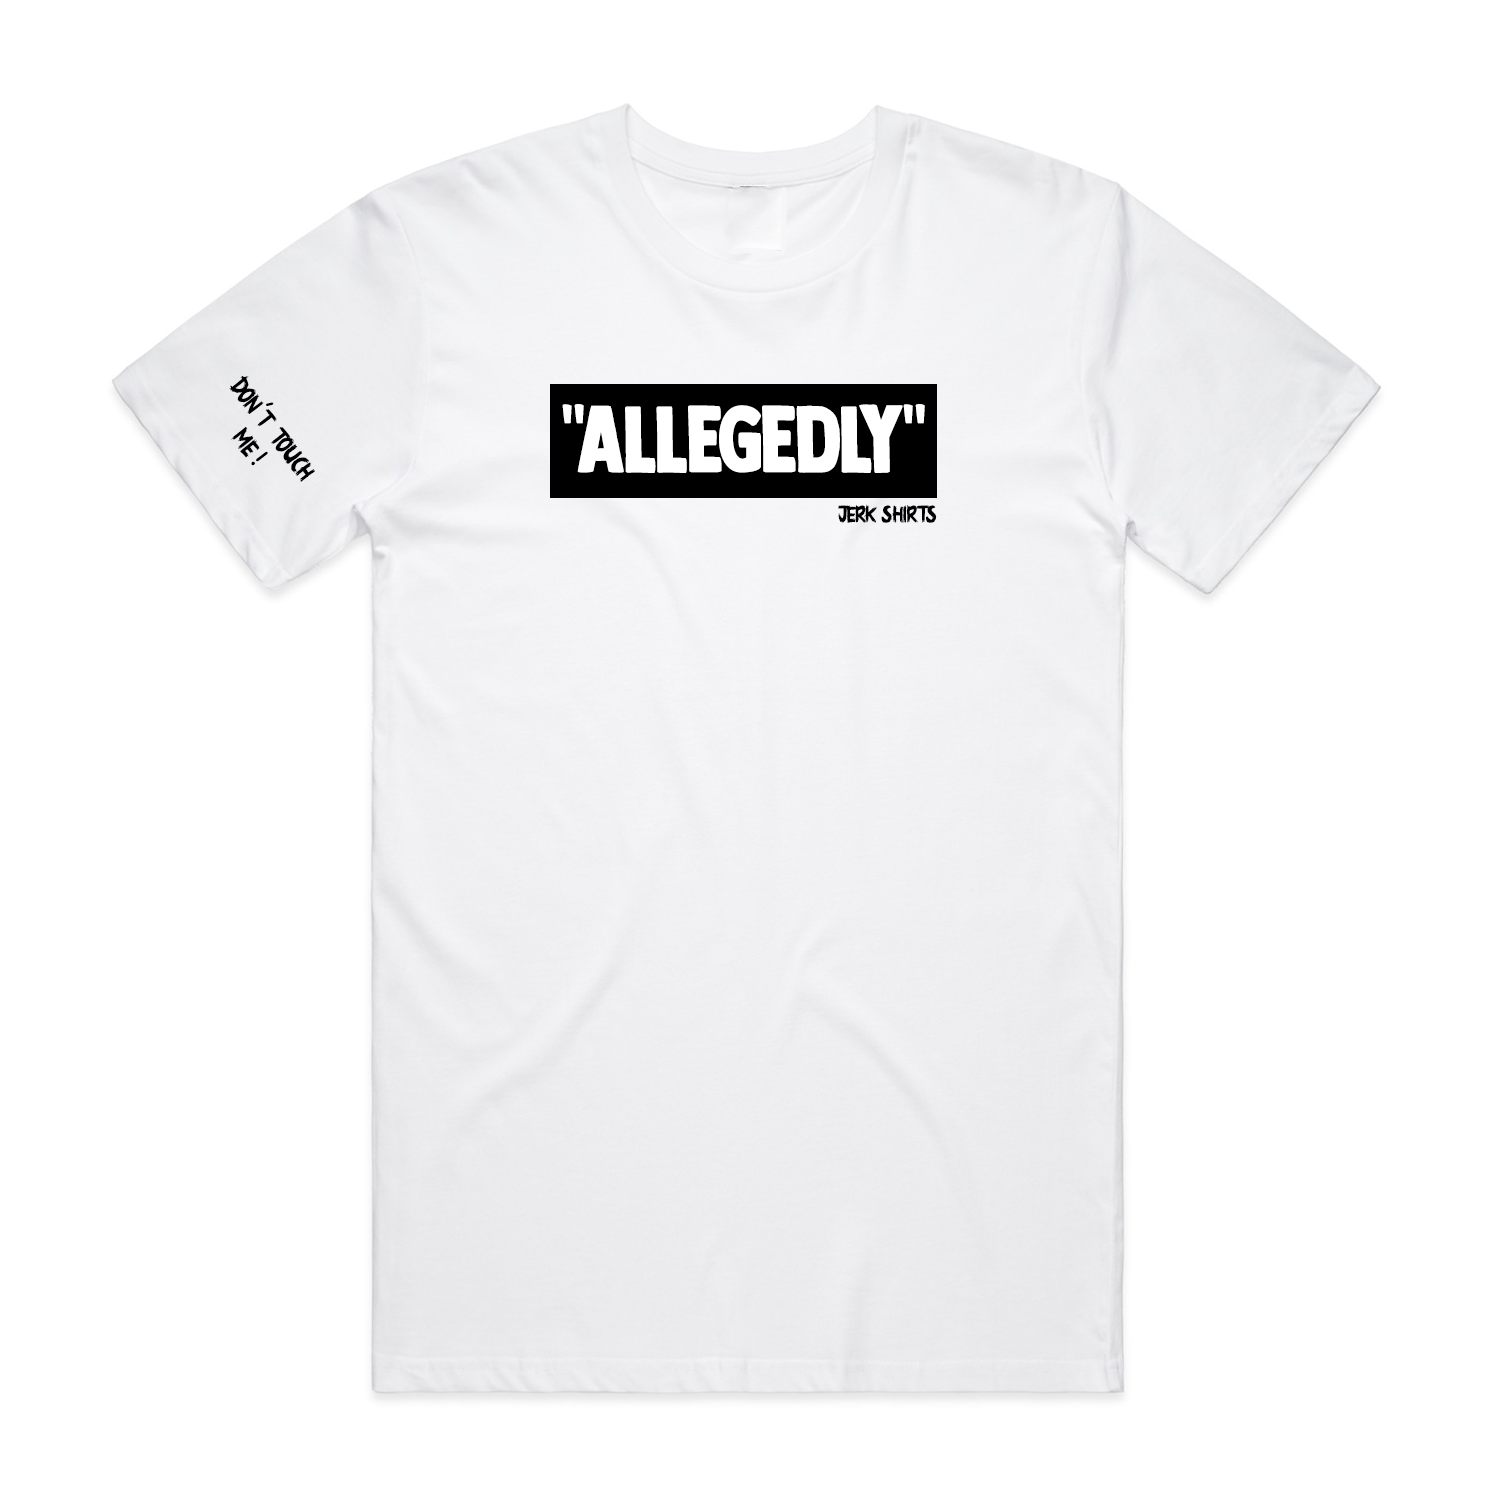 “Allegedly” Tee (White)